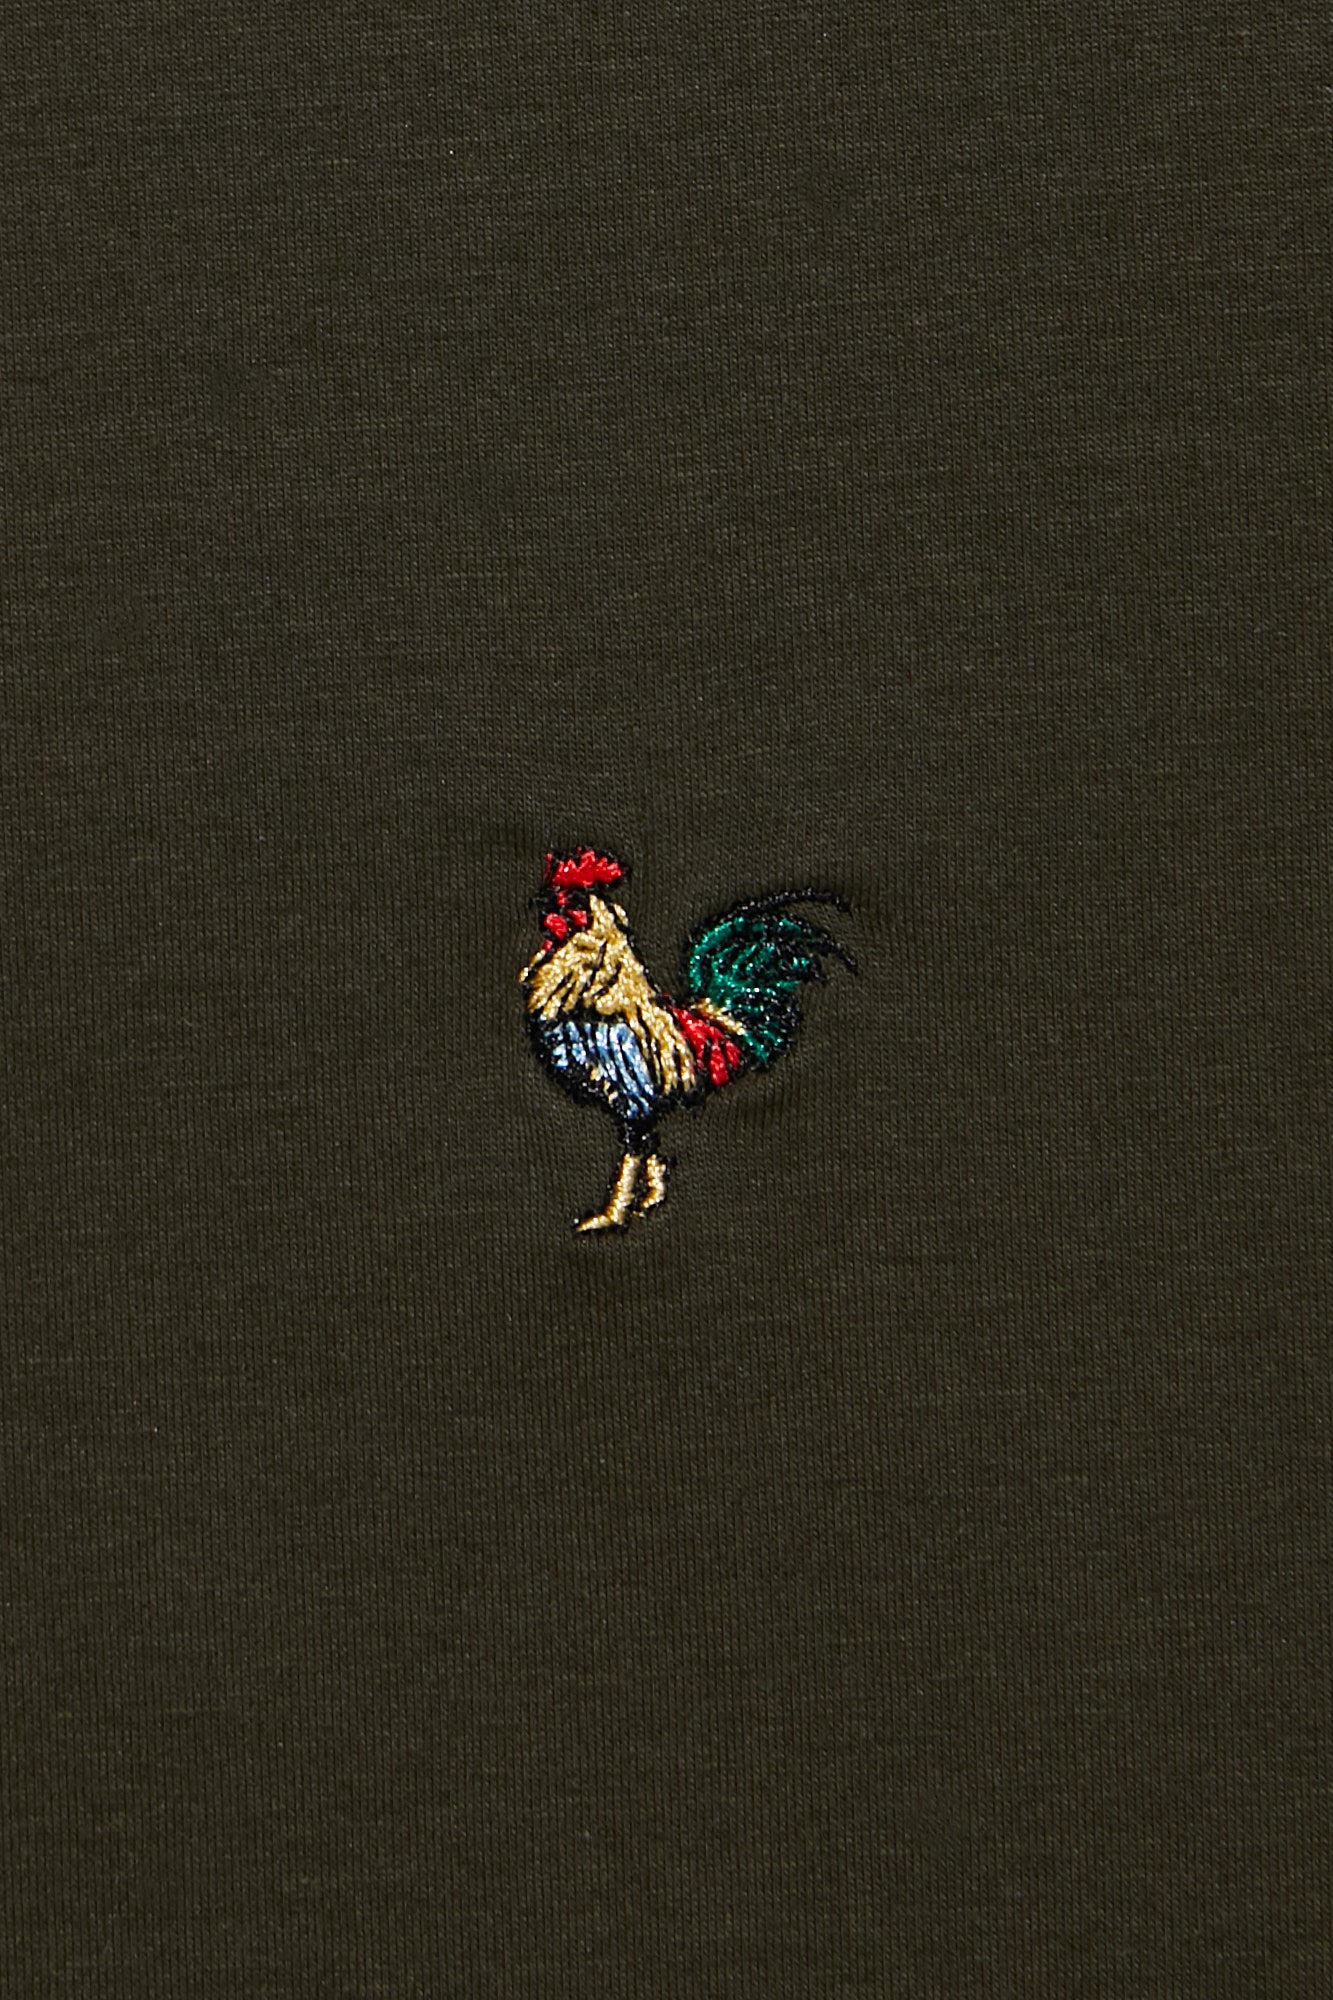 Mens Rooster Chest Embroidery Olive T-shirt